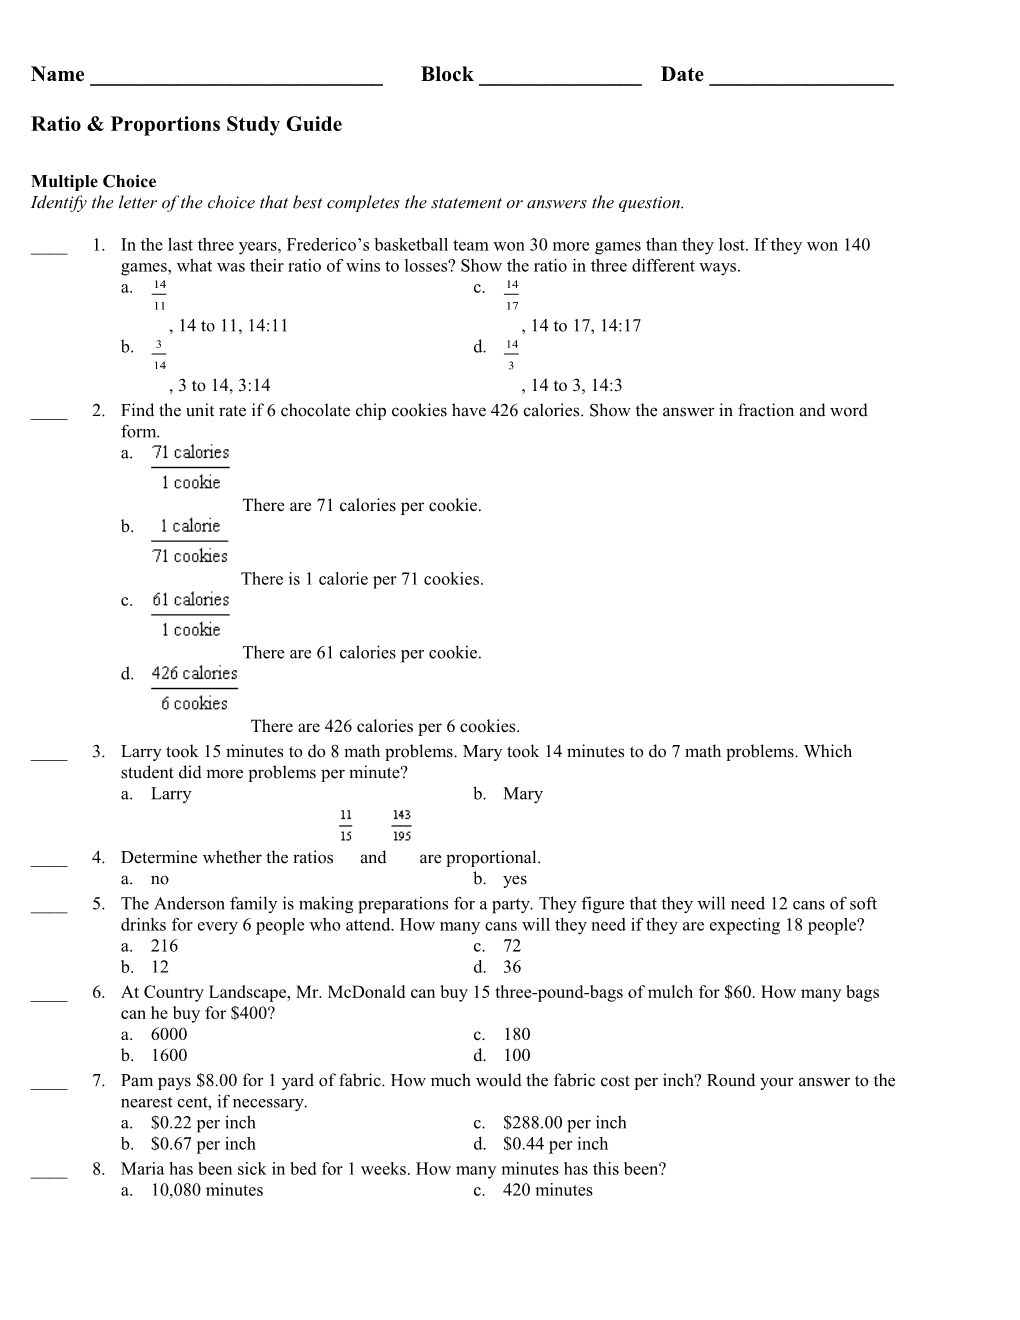 Ratio & Proportions Study Guide